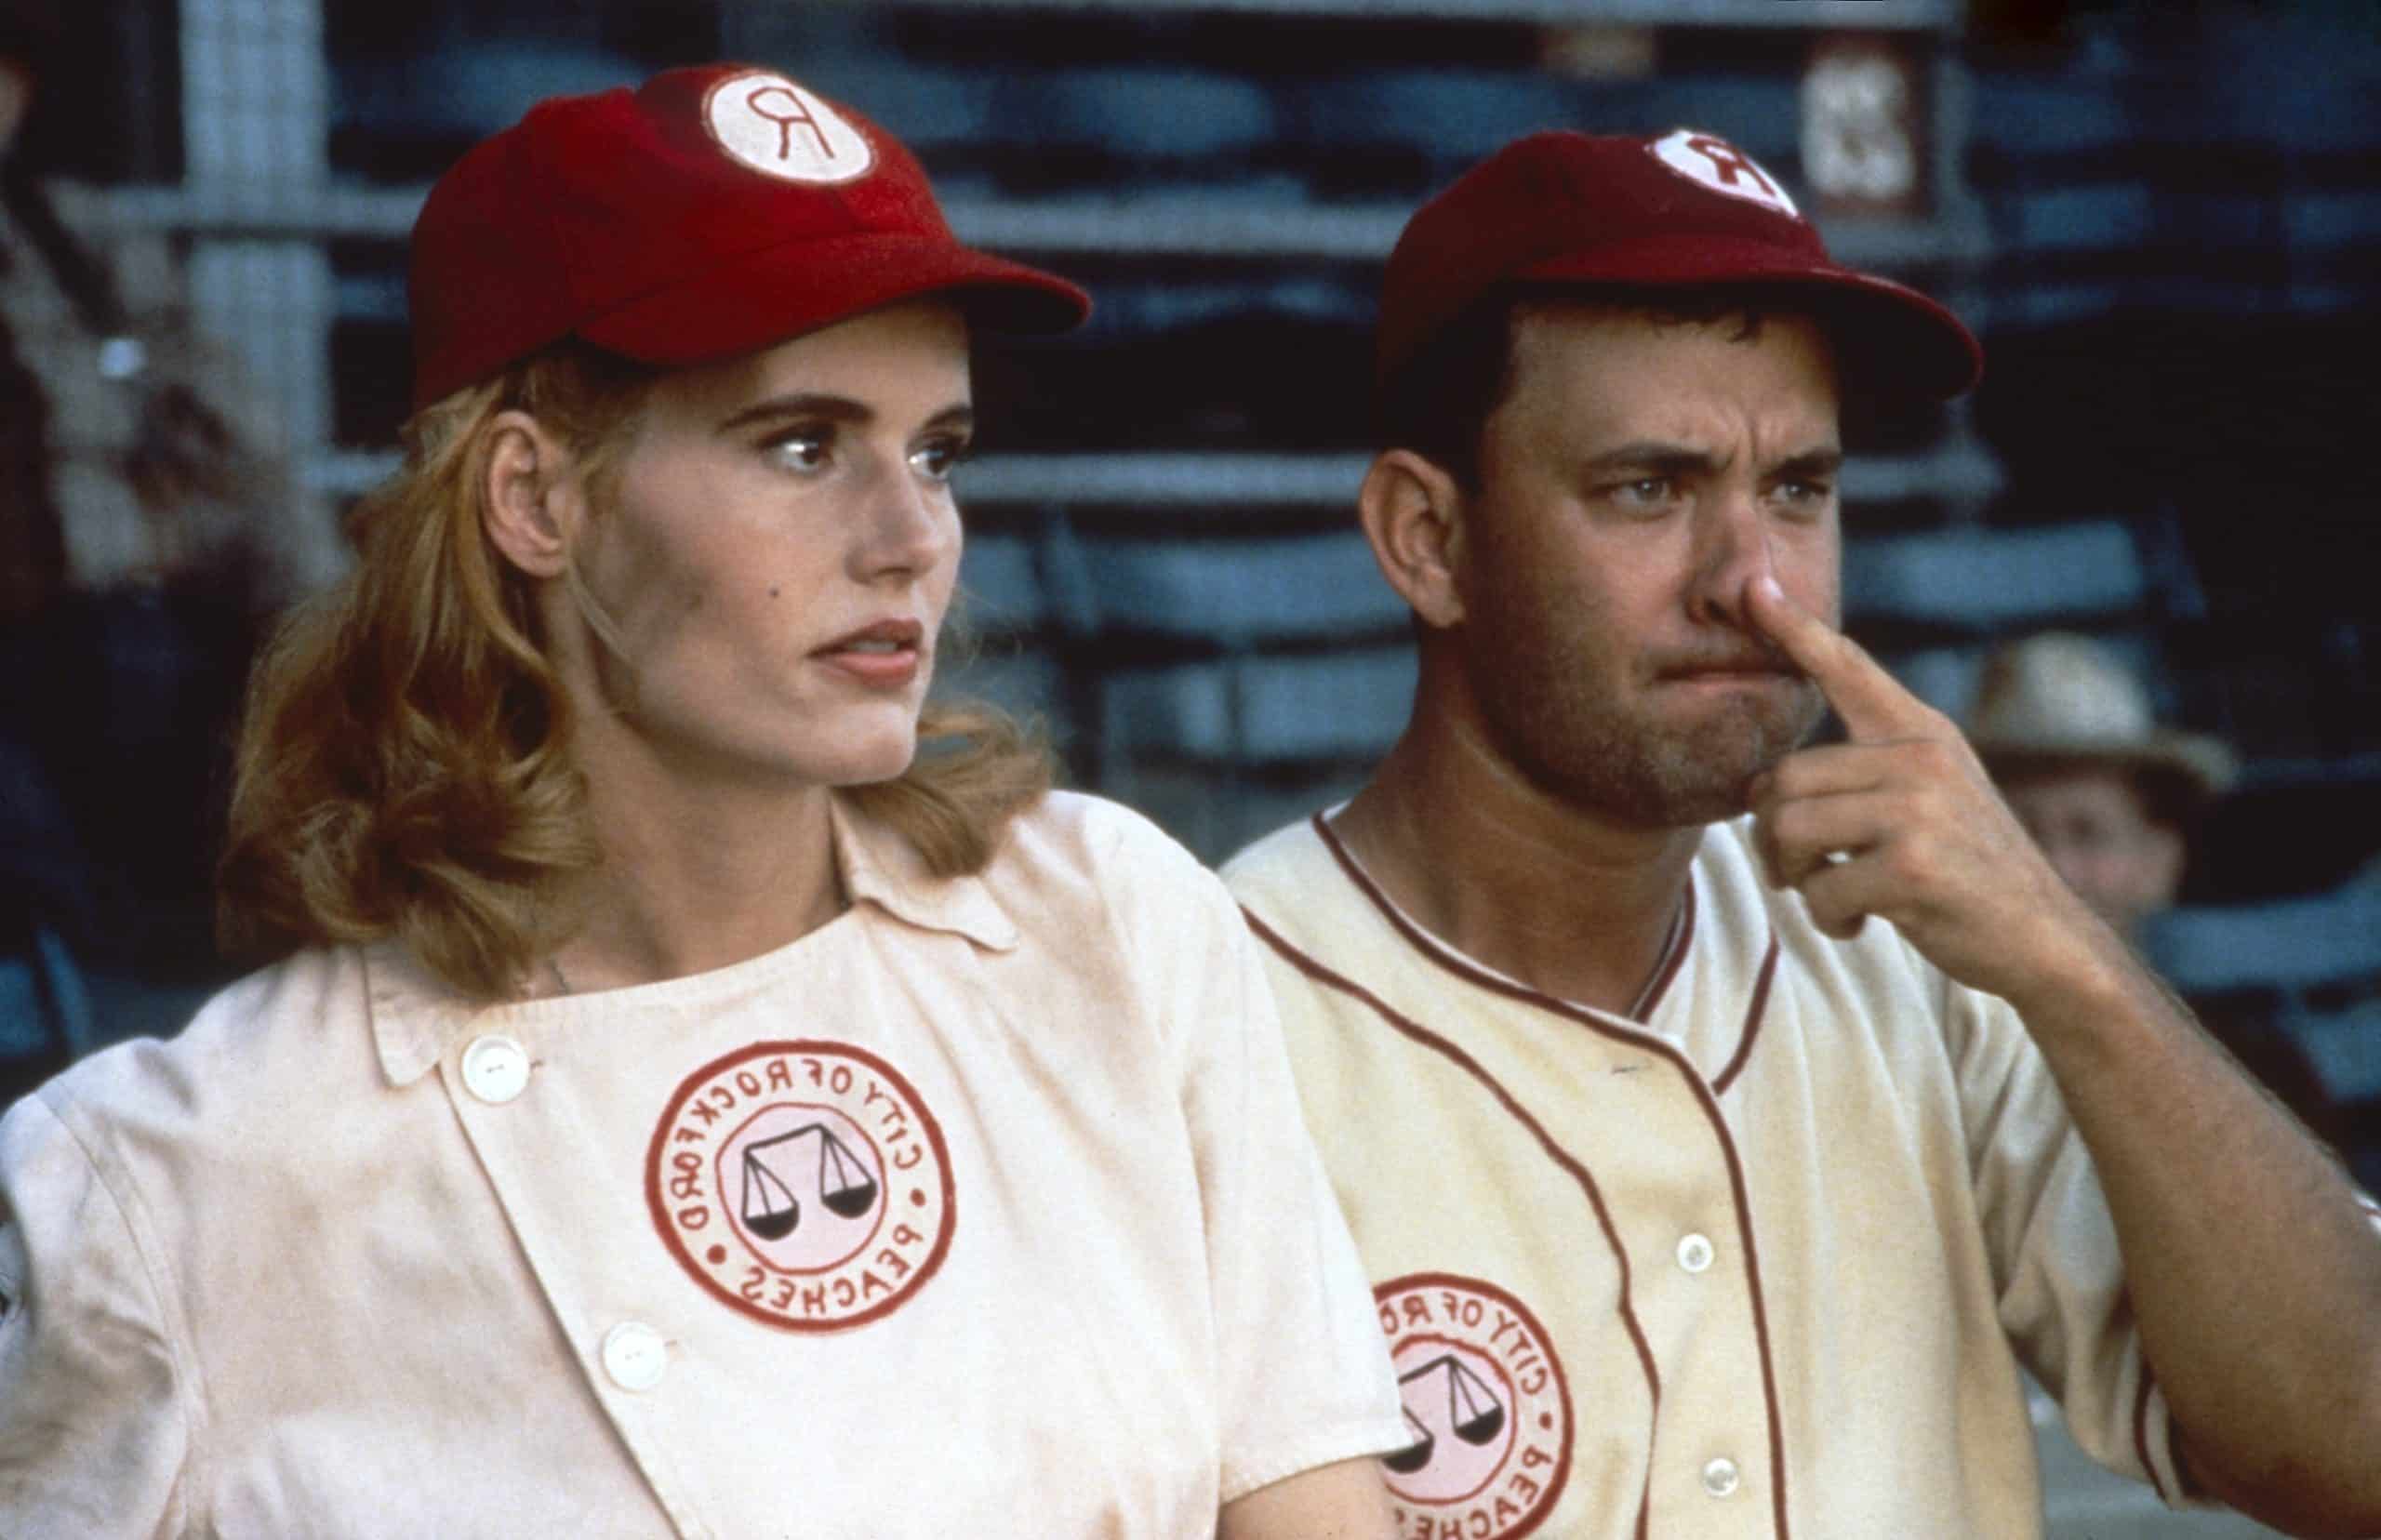 A LEAGUE OF THEIR OWN, from left: Geena Davis, Tom Hanks, 1992